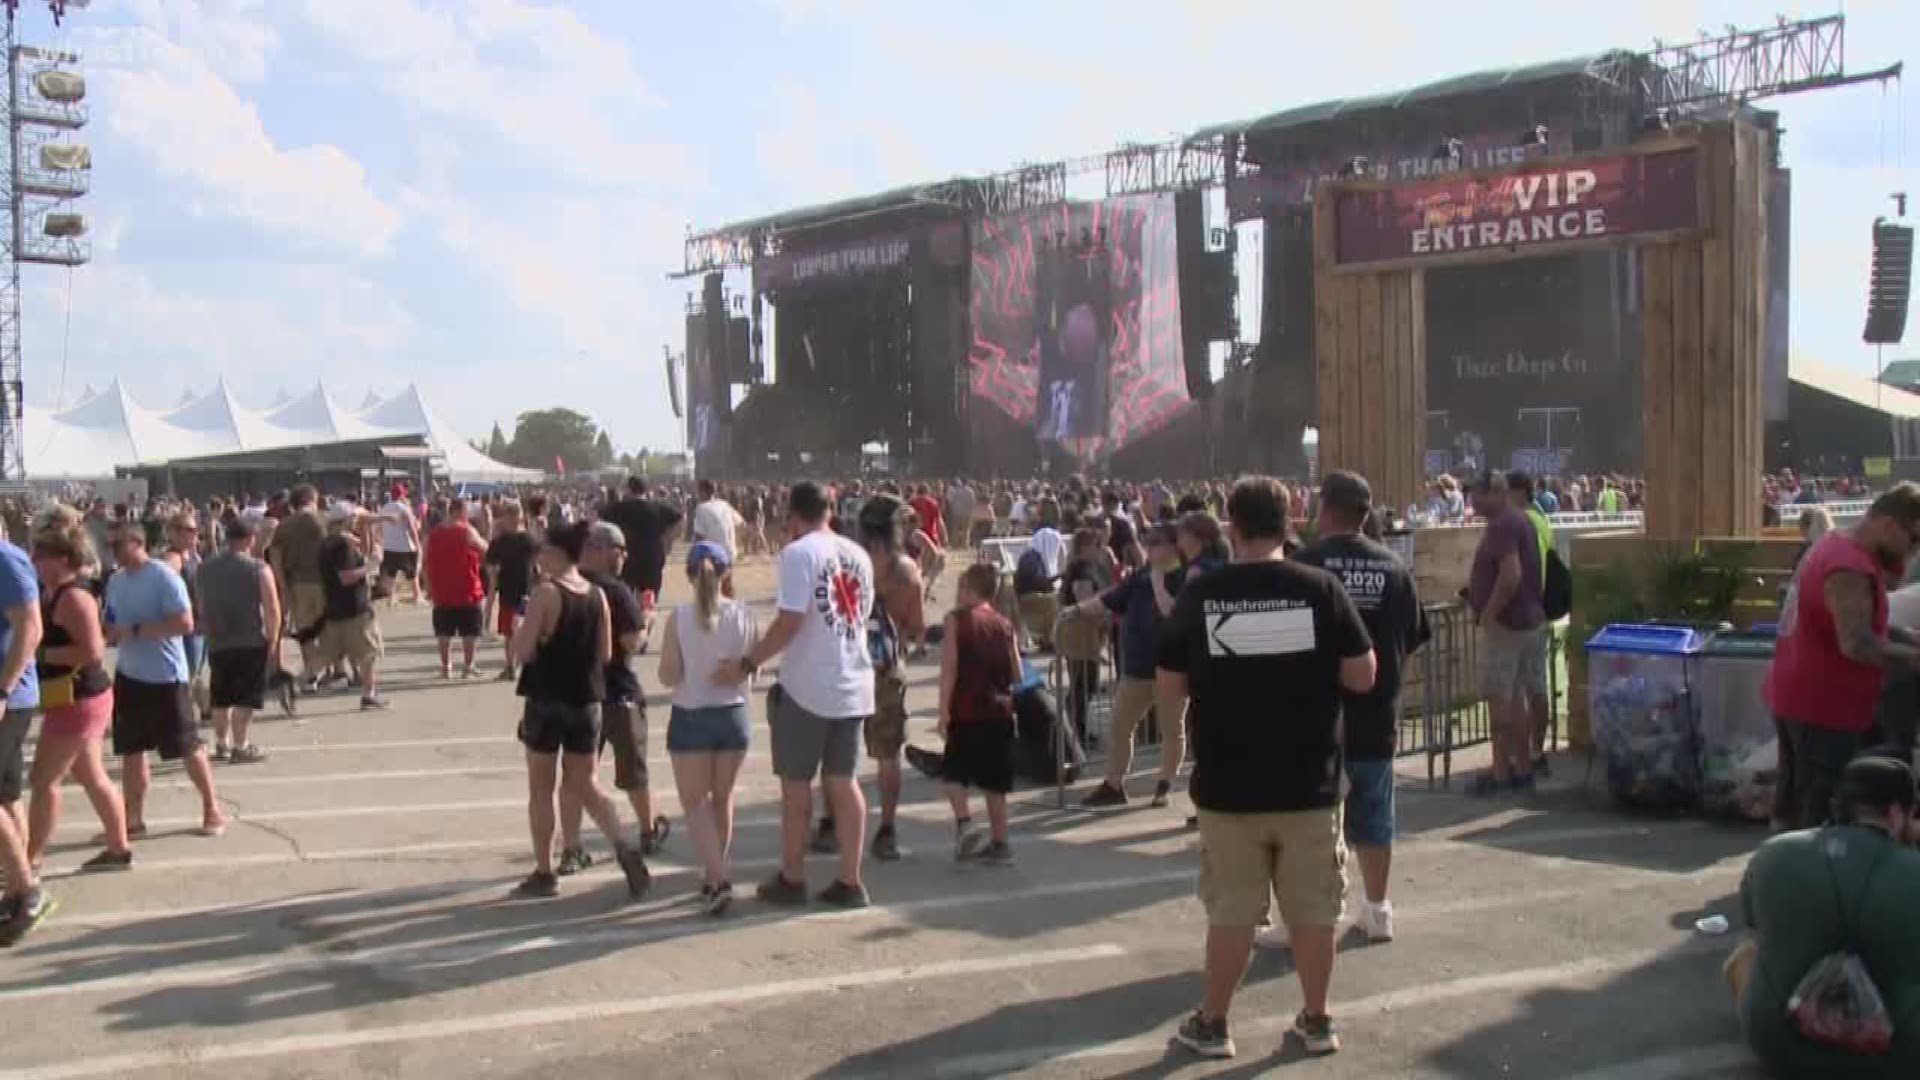 This year's Louder Than Life Festival wrapped up Sunday evening.